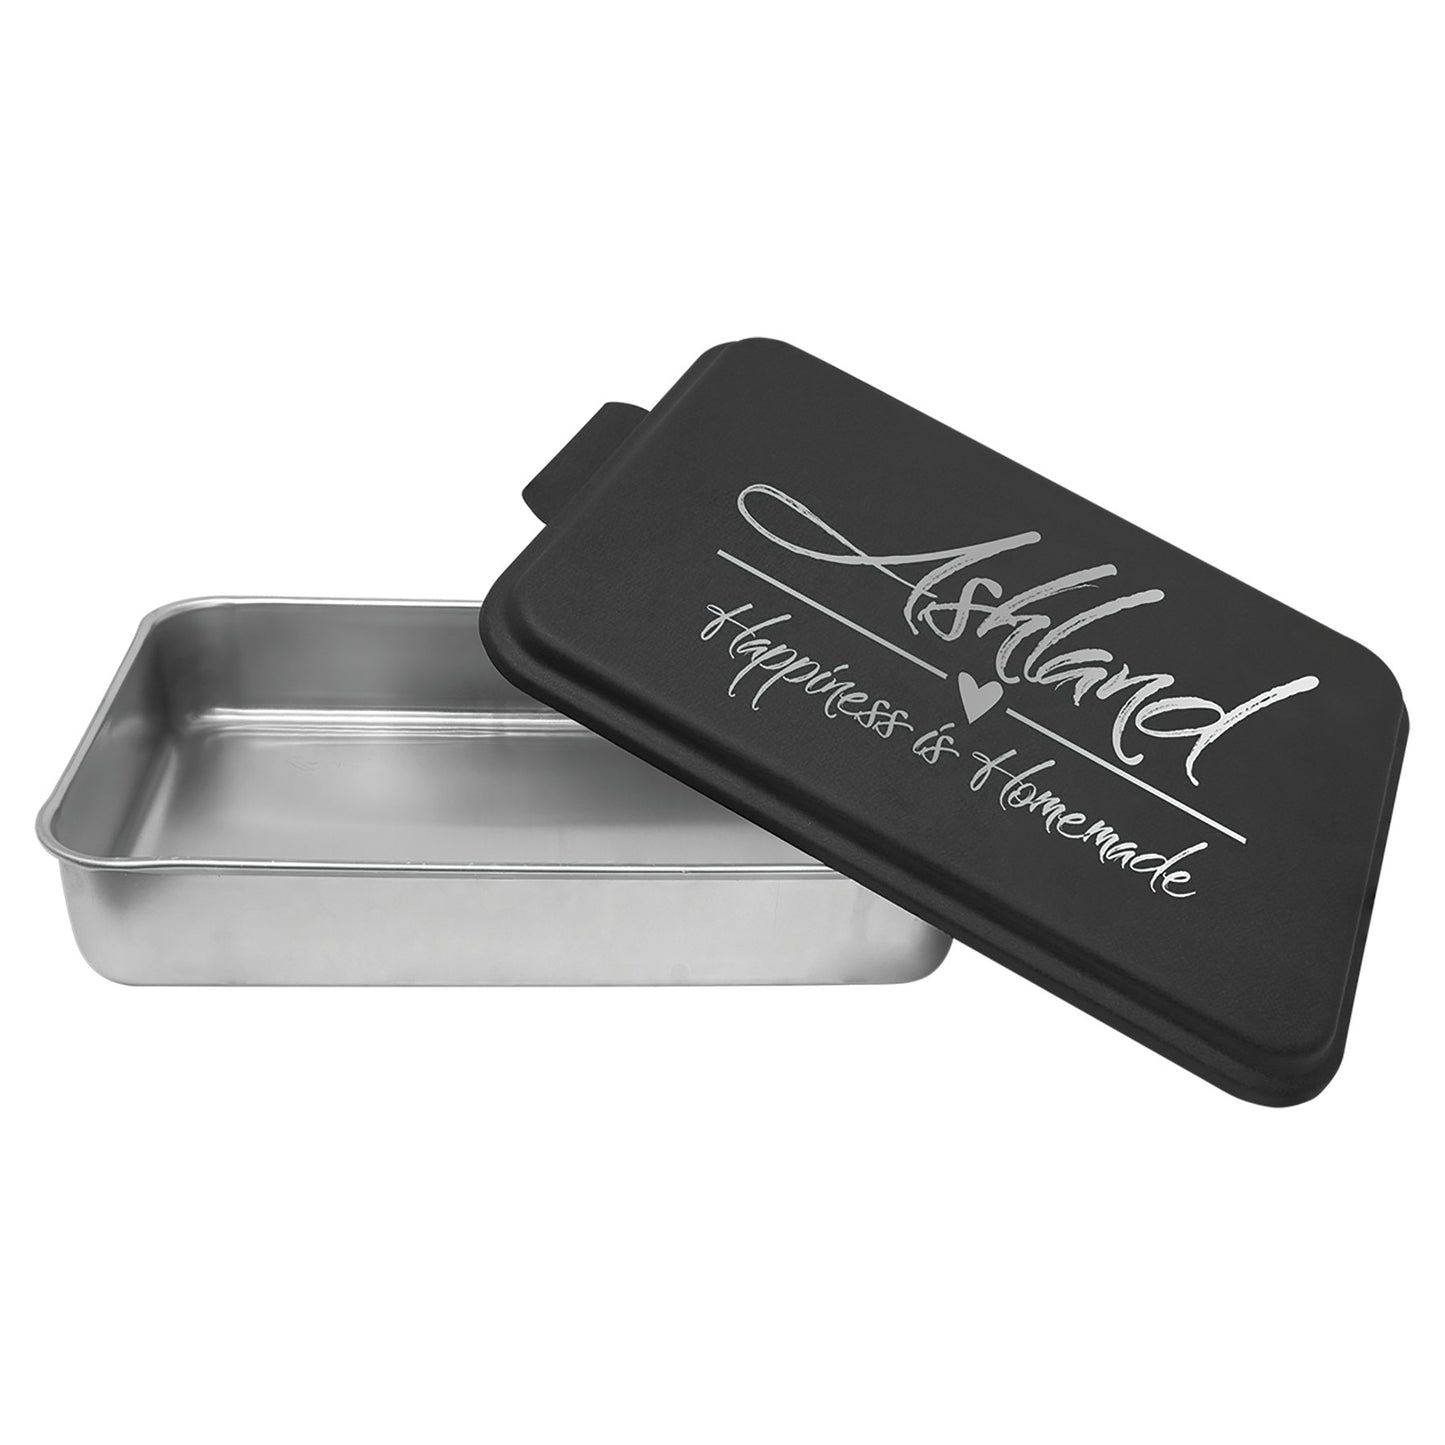 Personalized 9x13" Cake Pan with snap-on Lid - Etchified-Etchified-BPN101